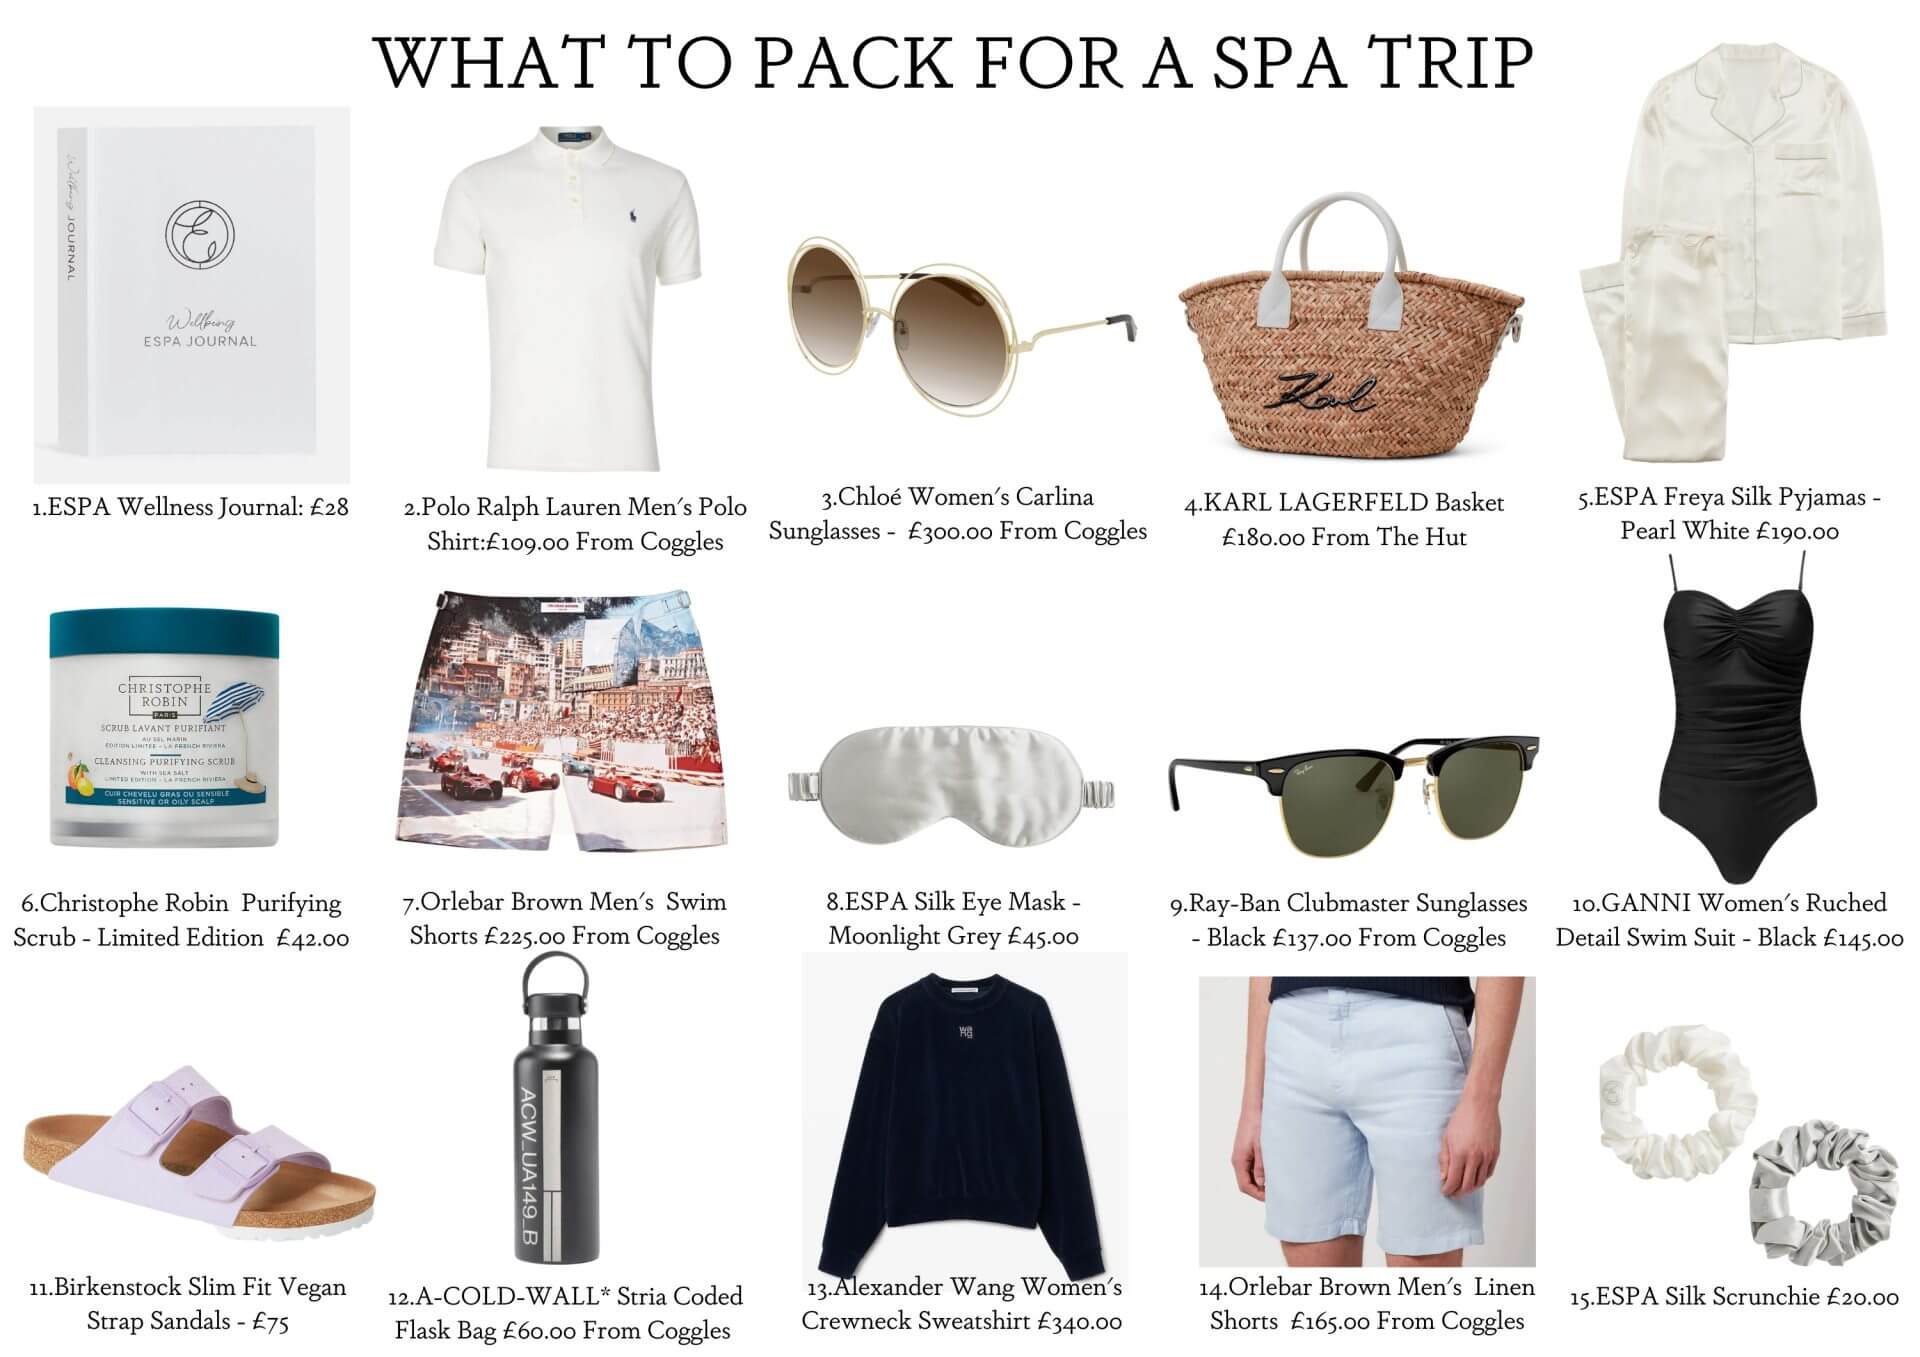 What to Pack for a Spa Trip - Lux Magazine